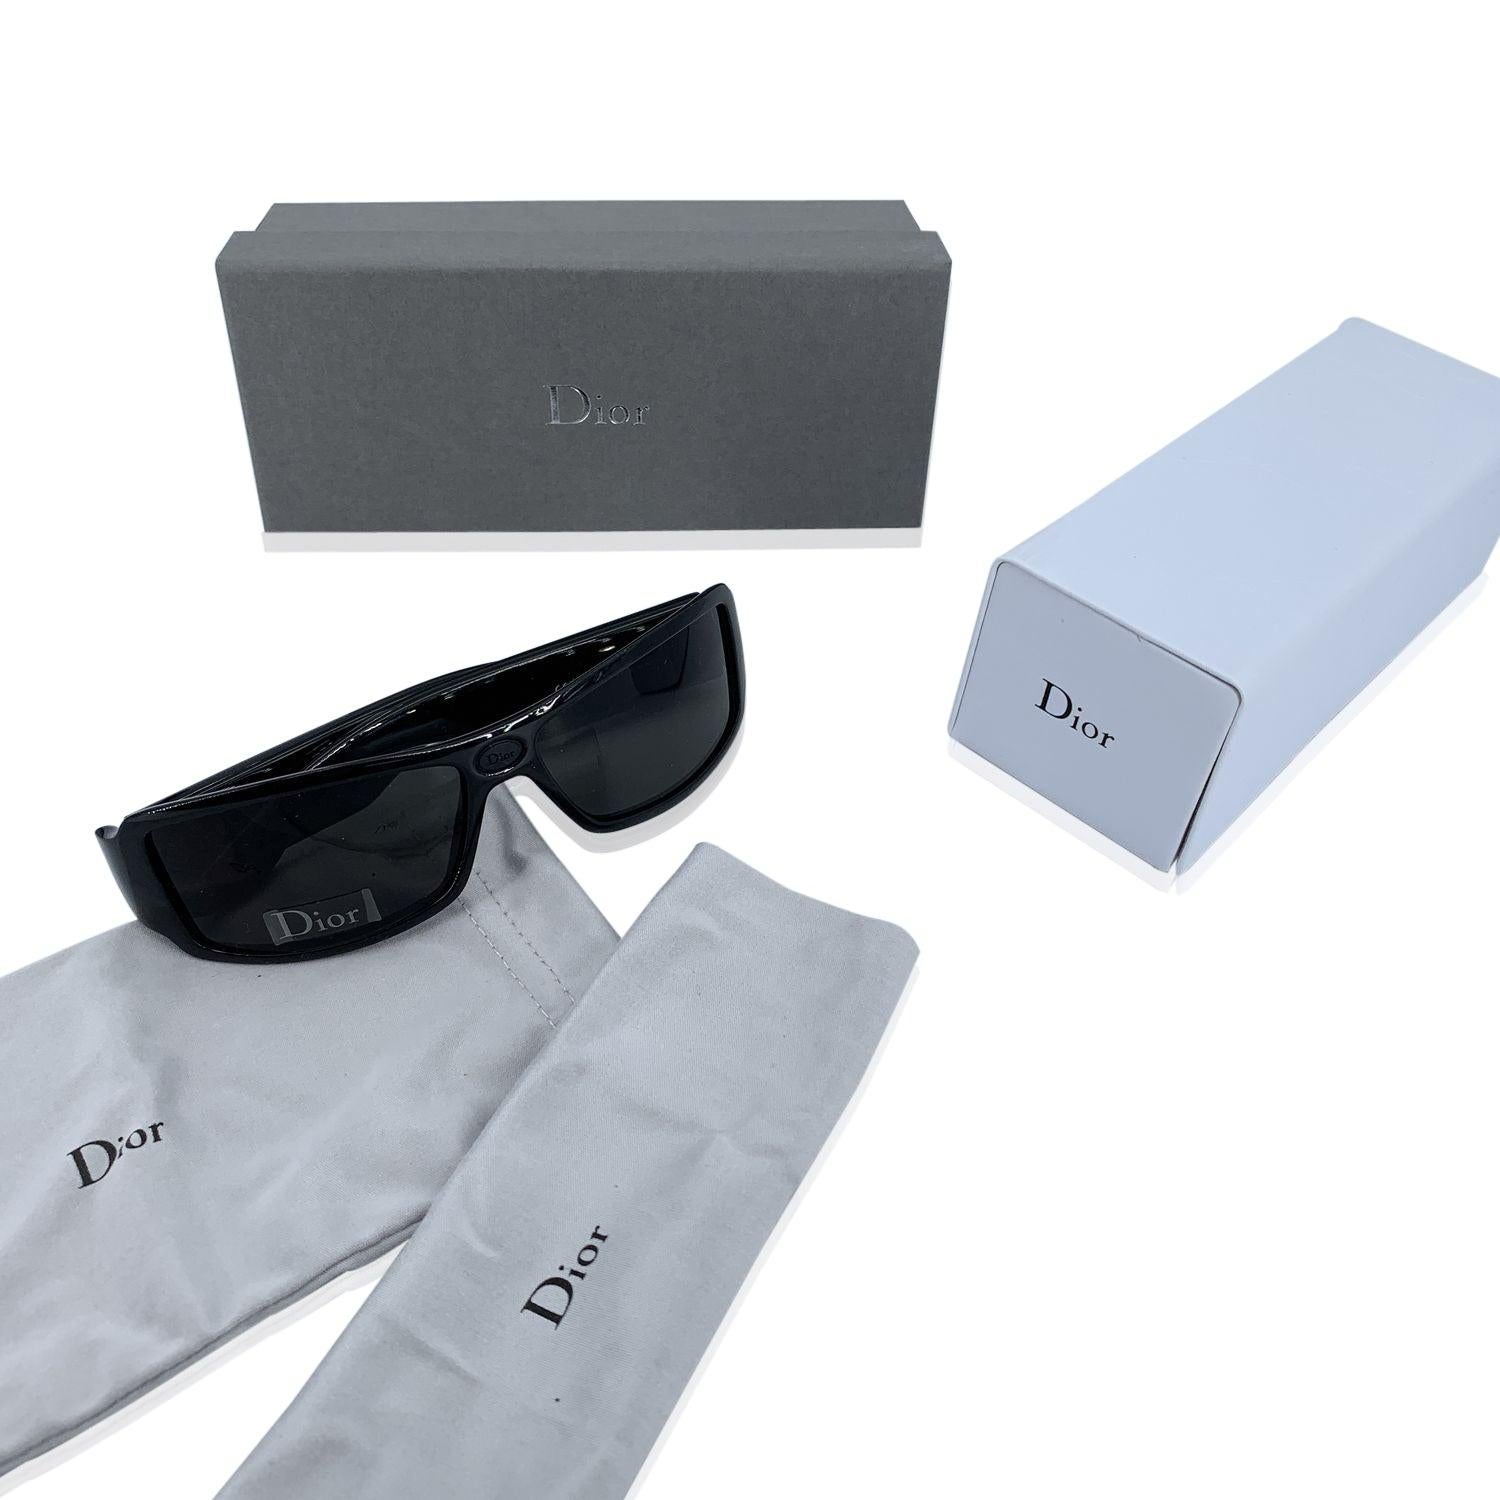 Vintage 90s unisex CHRISTIAN DIOR Rubber 2 Sunglasses, XH1. Size 59/14 130mm. Black acetate frame, sides with monogram Oblique rubber panels on ears. 100% Total UVA/UVB protection grey lenses. Made in Italy. Details MATERIAL: Plastic COLOR: Black